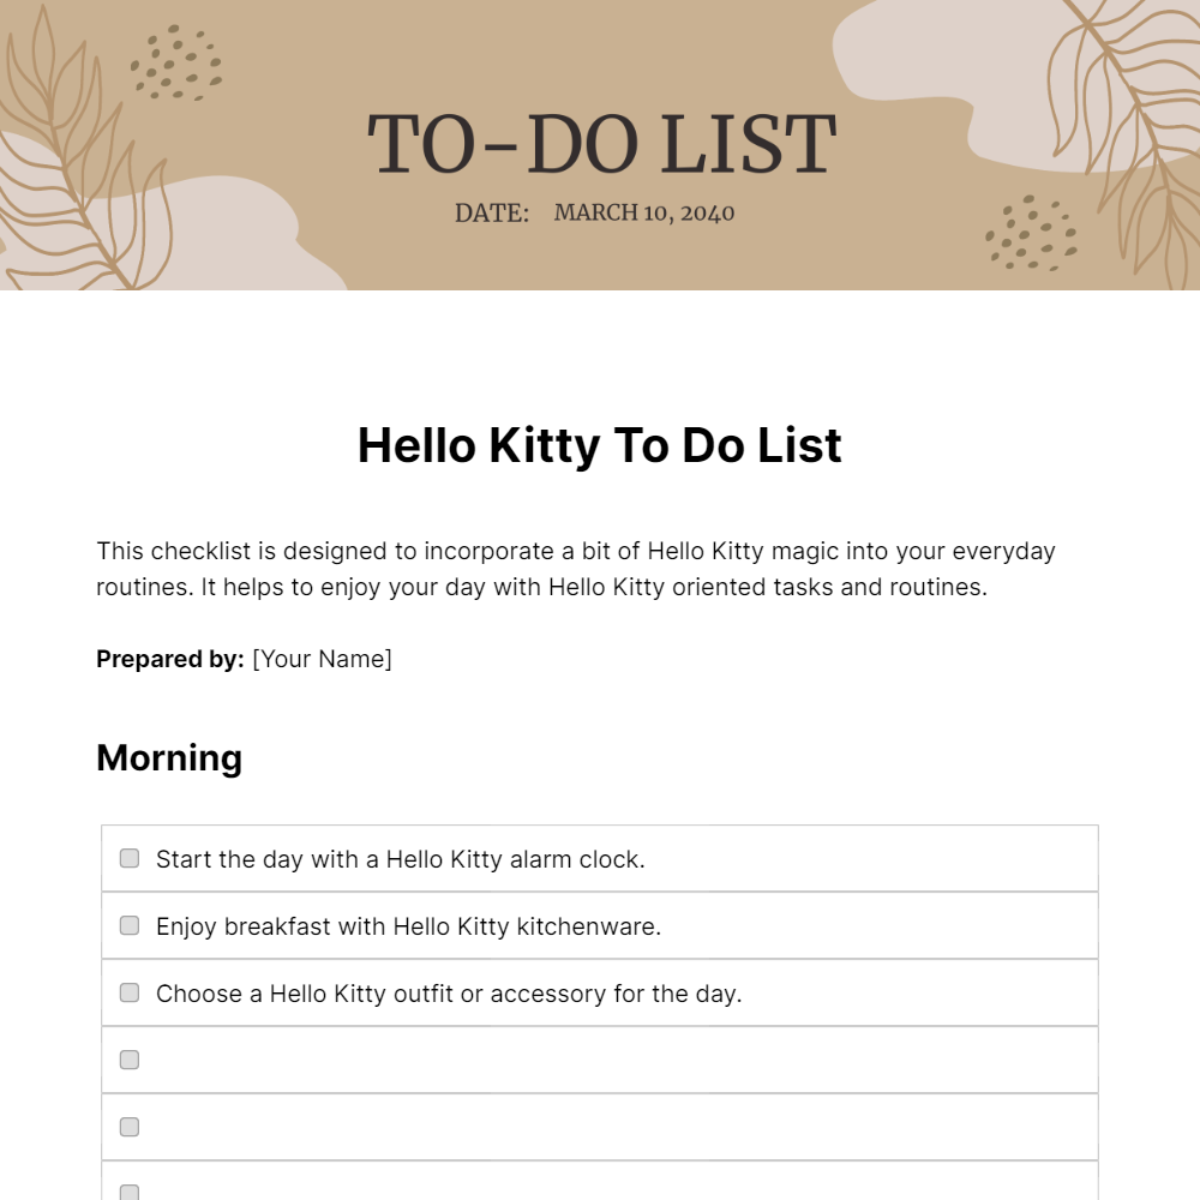 Hello Kitty To Do List Template